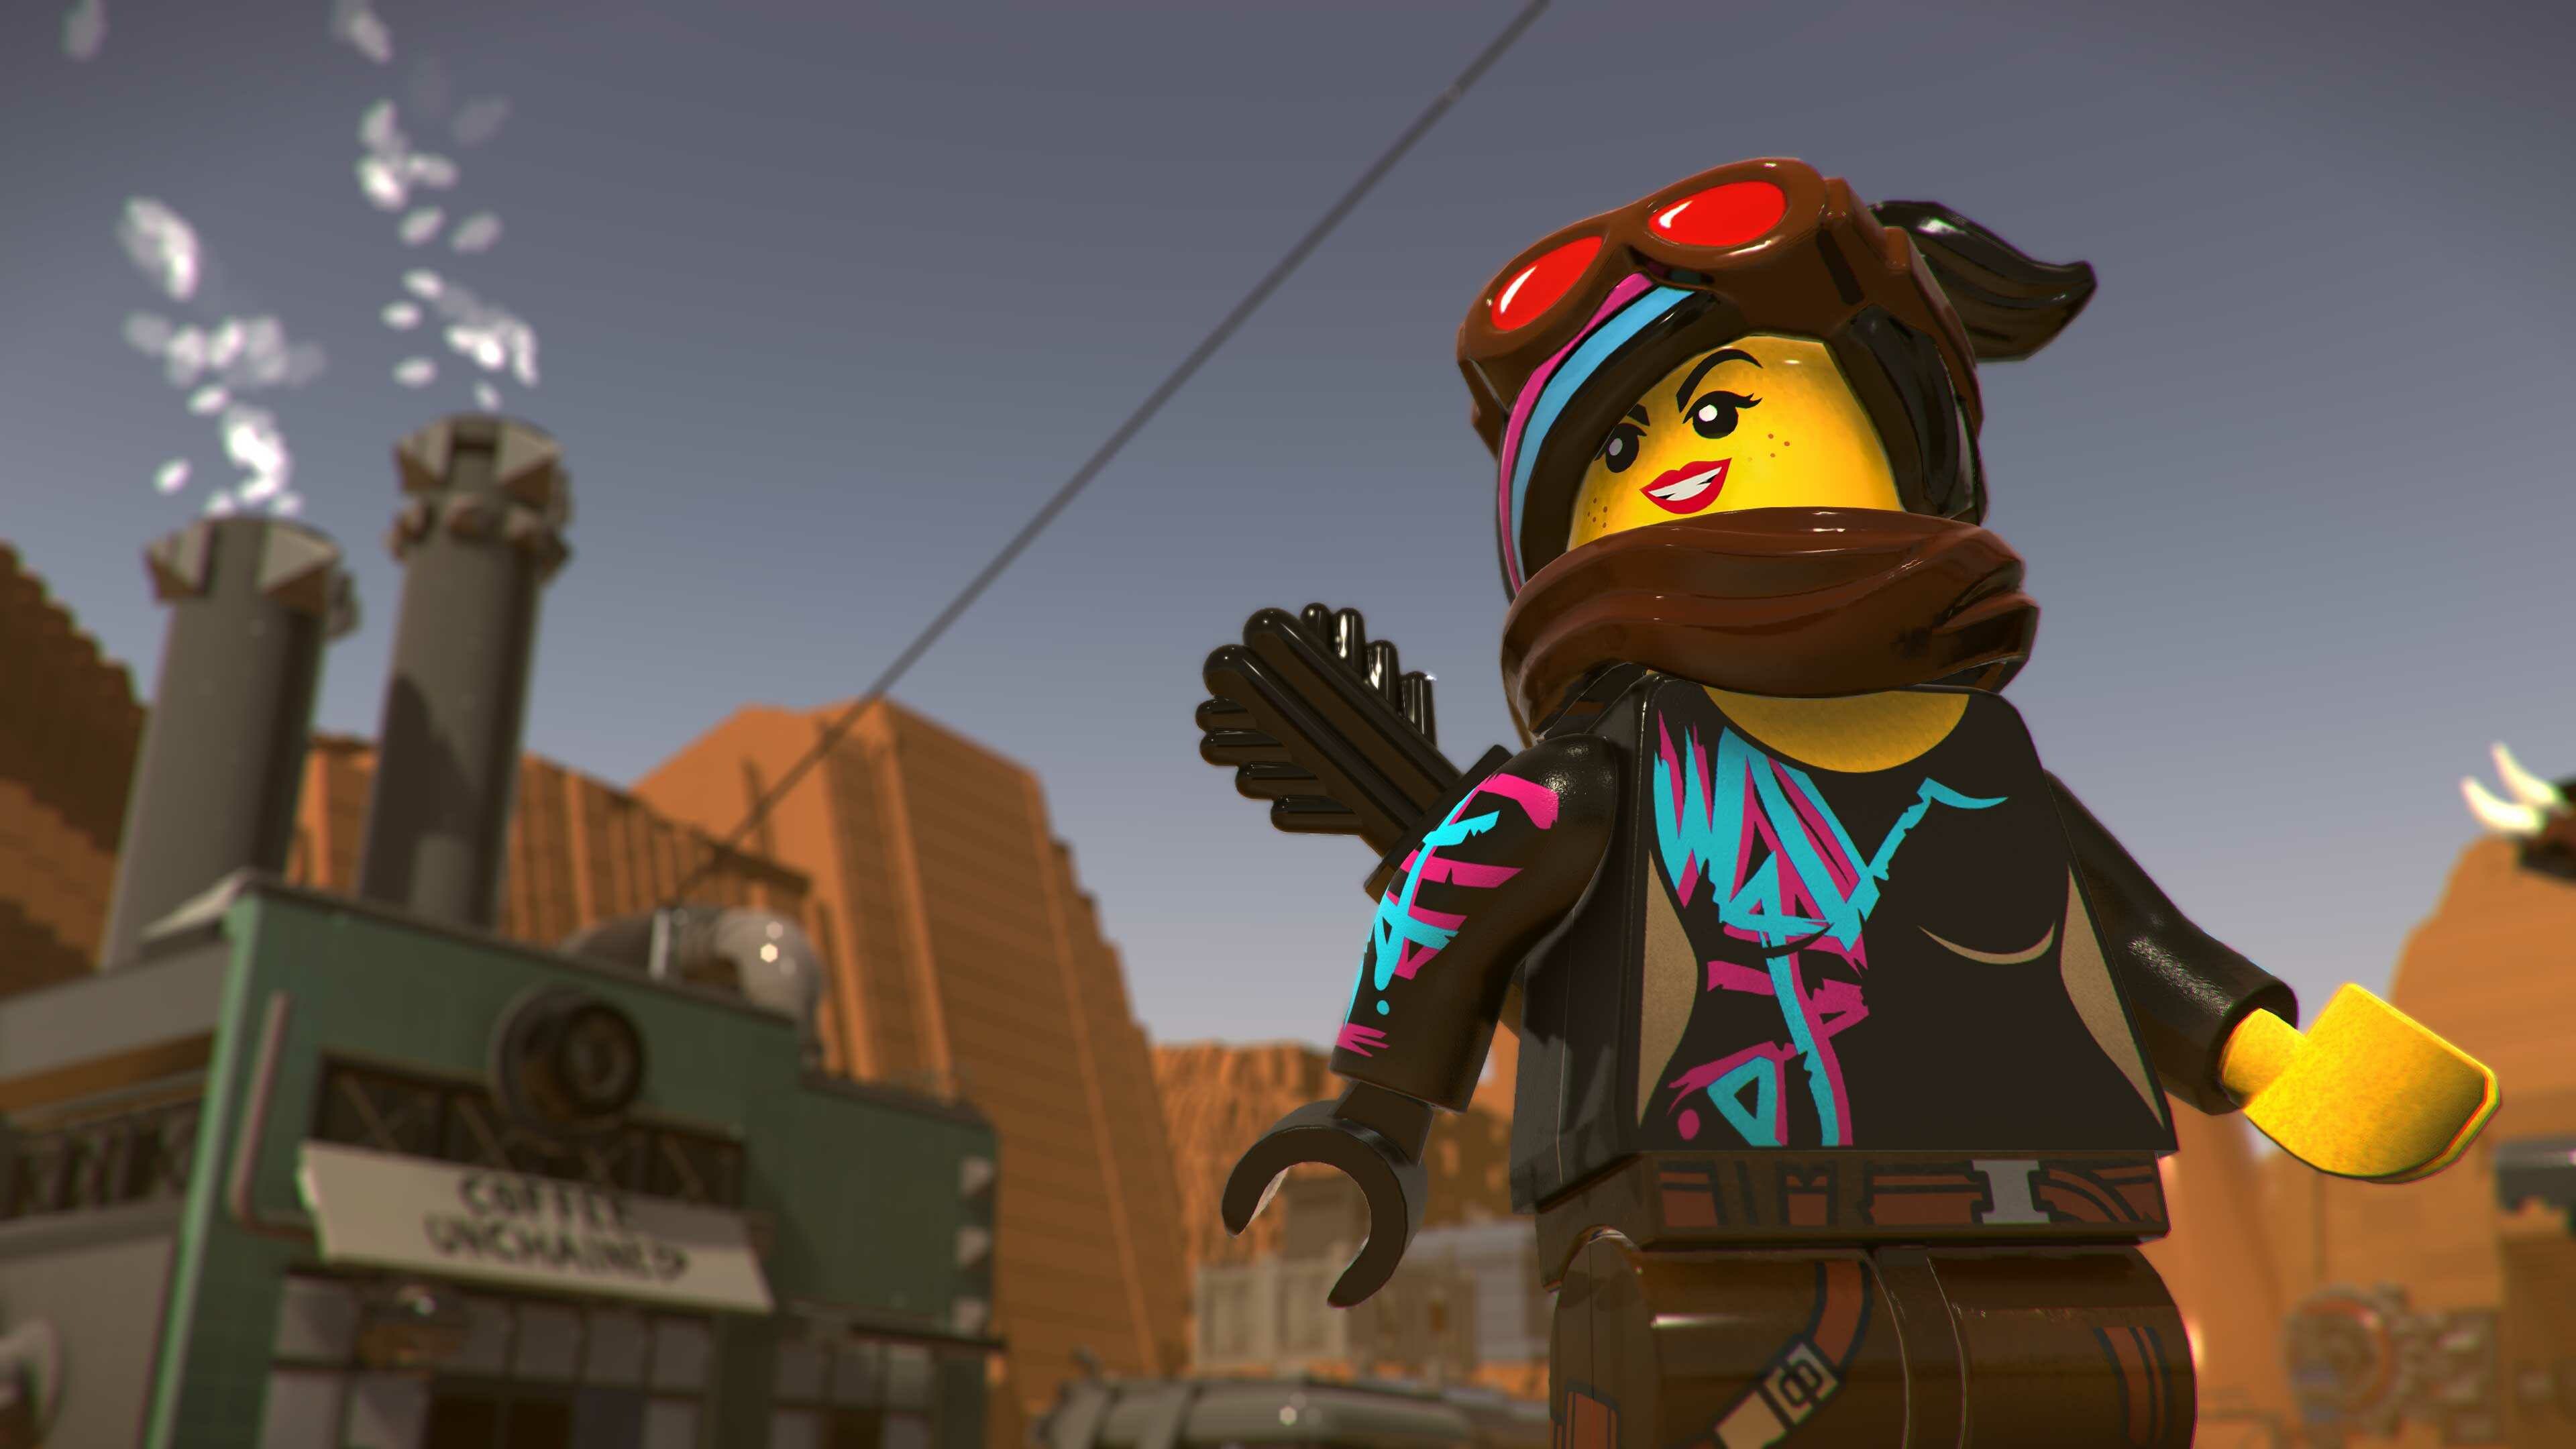 The Lego Movie: A 2019 computer-animated adventure comedy film produced by the Warner Animation Group. 3840x2160 4K Wallpaper.